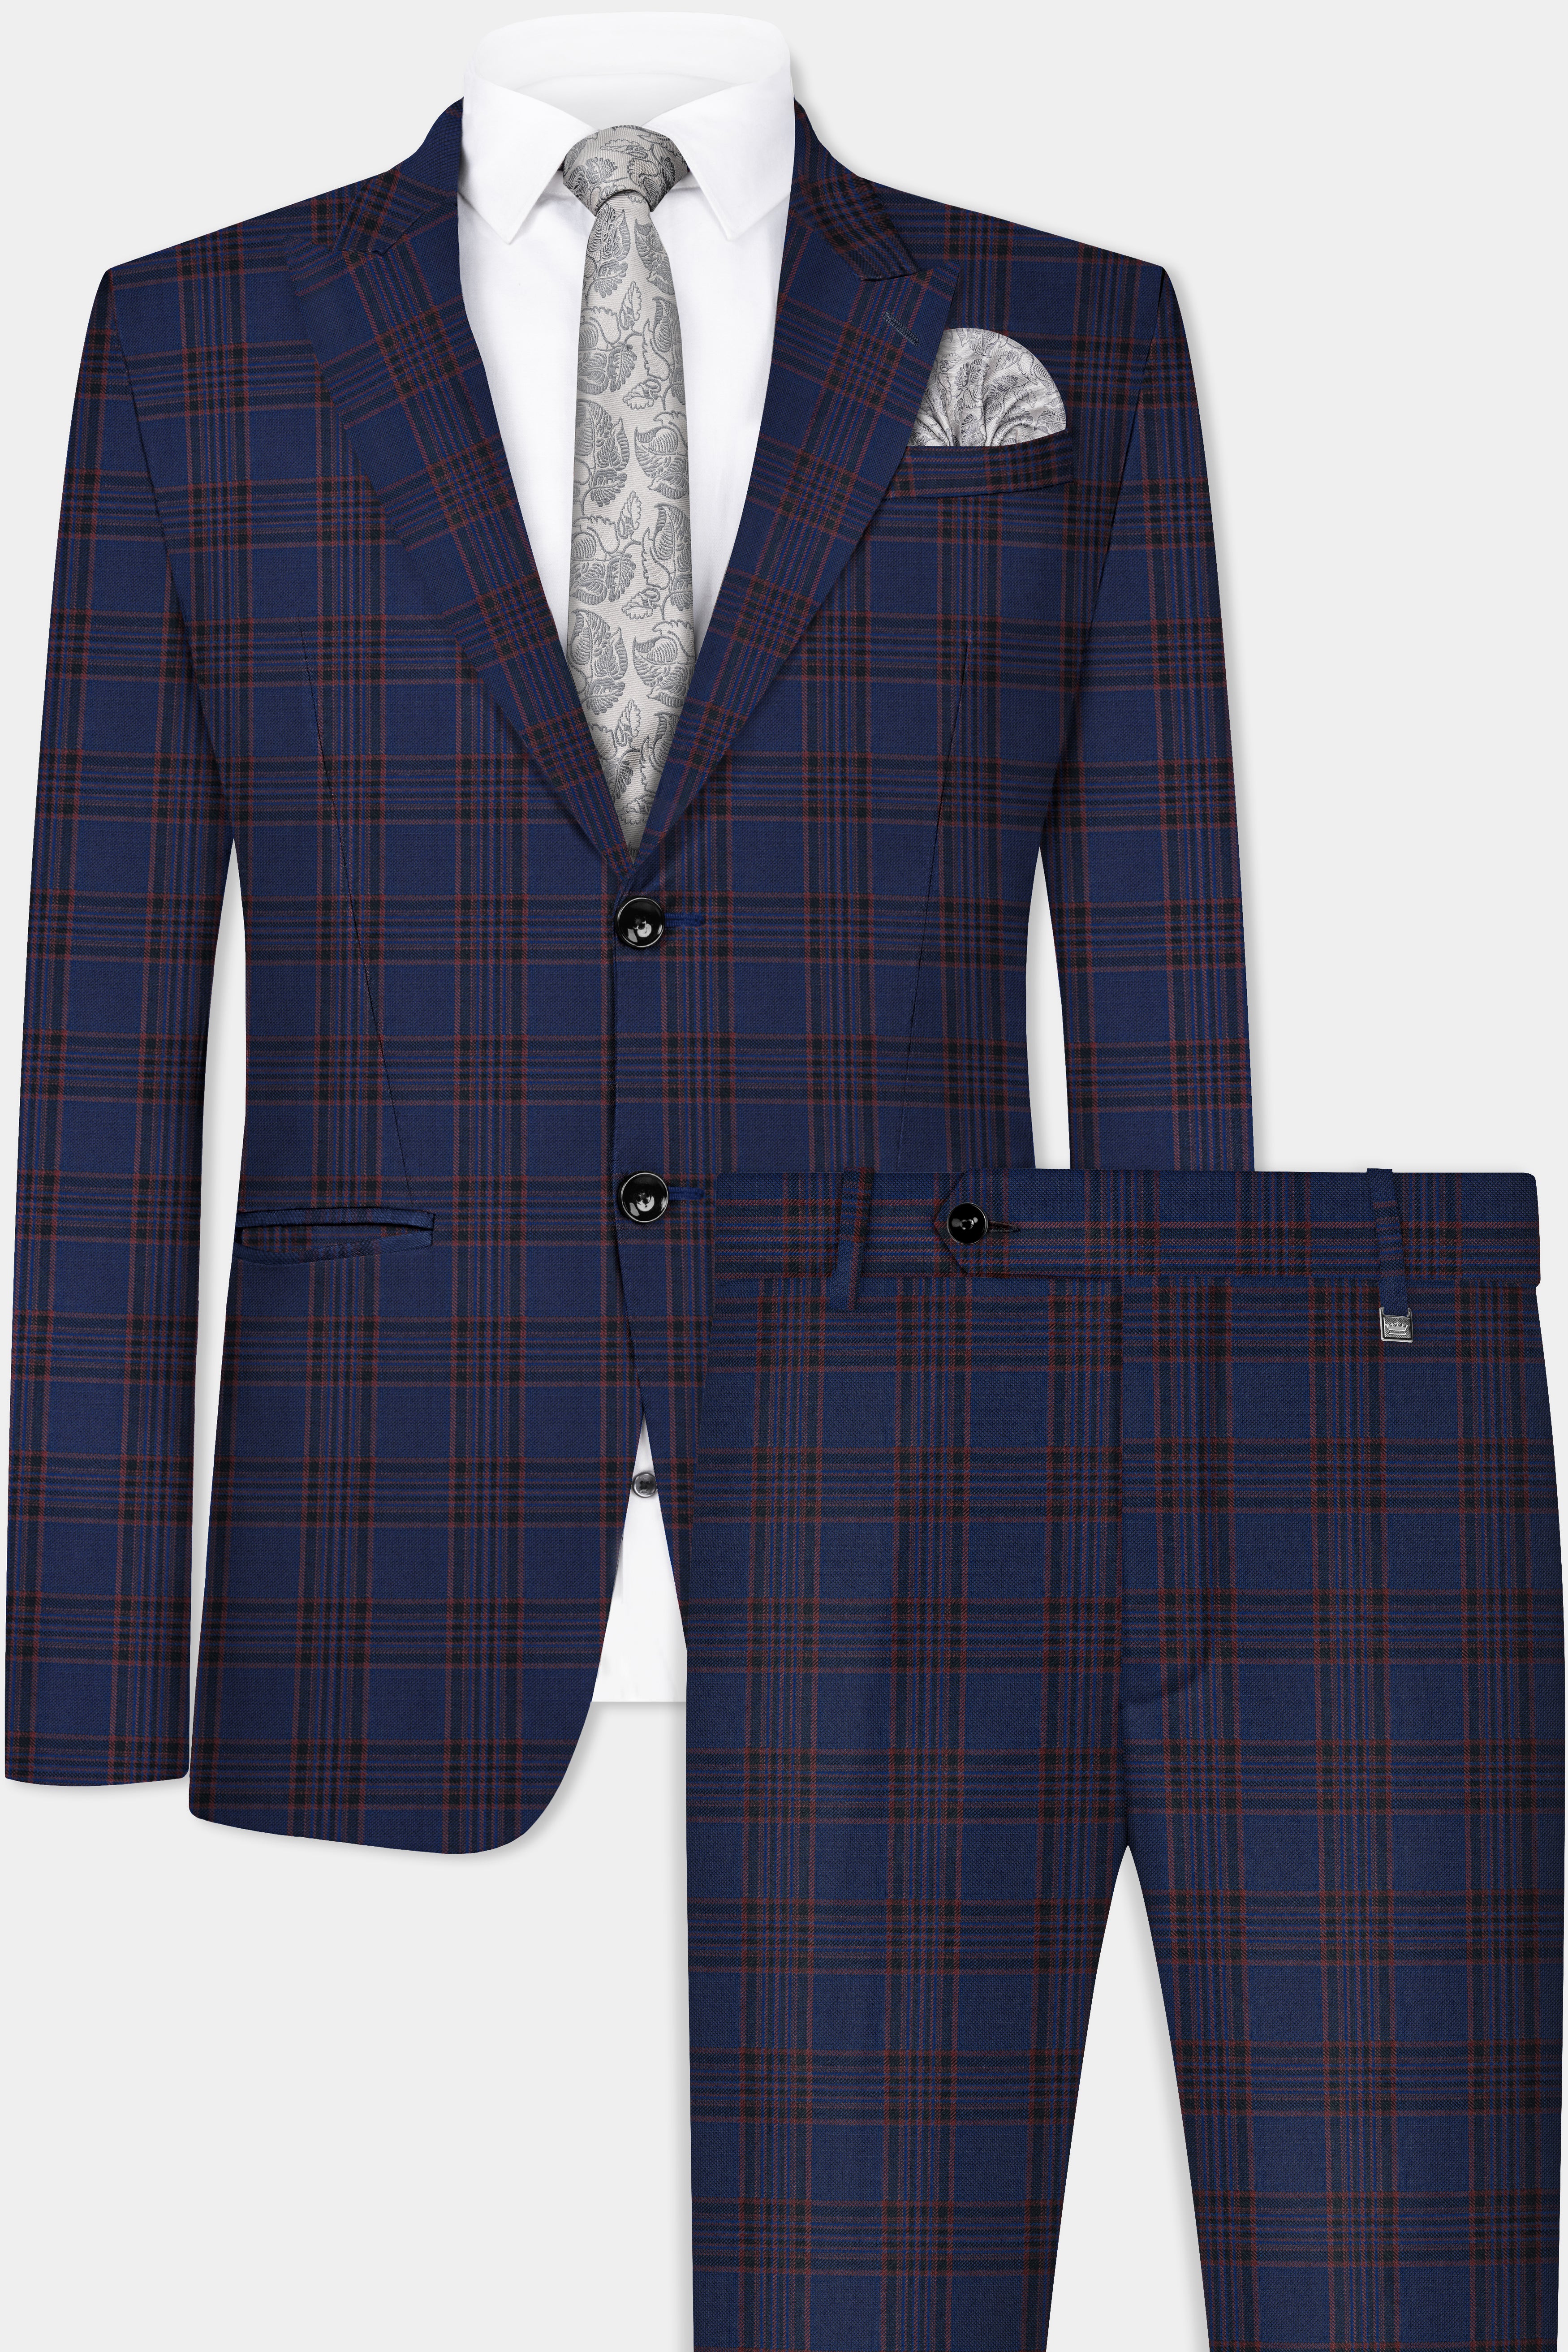 Bunting Blue with Livid Brown Plaid Wool Blend Suit